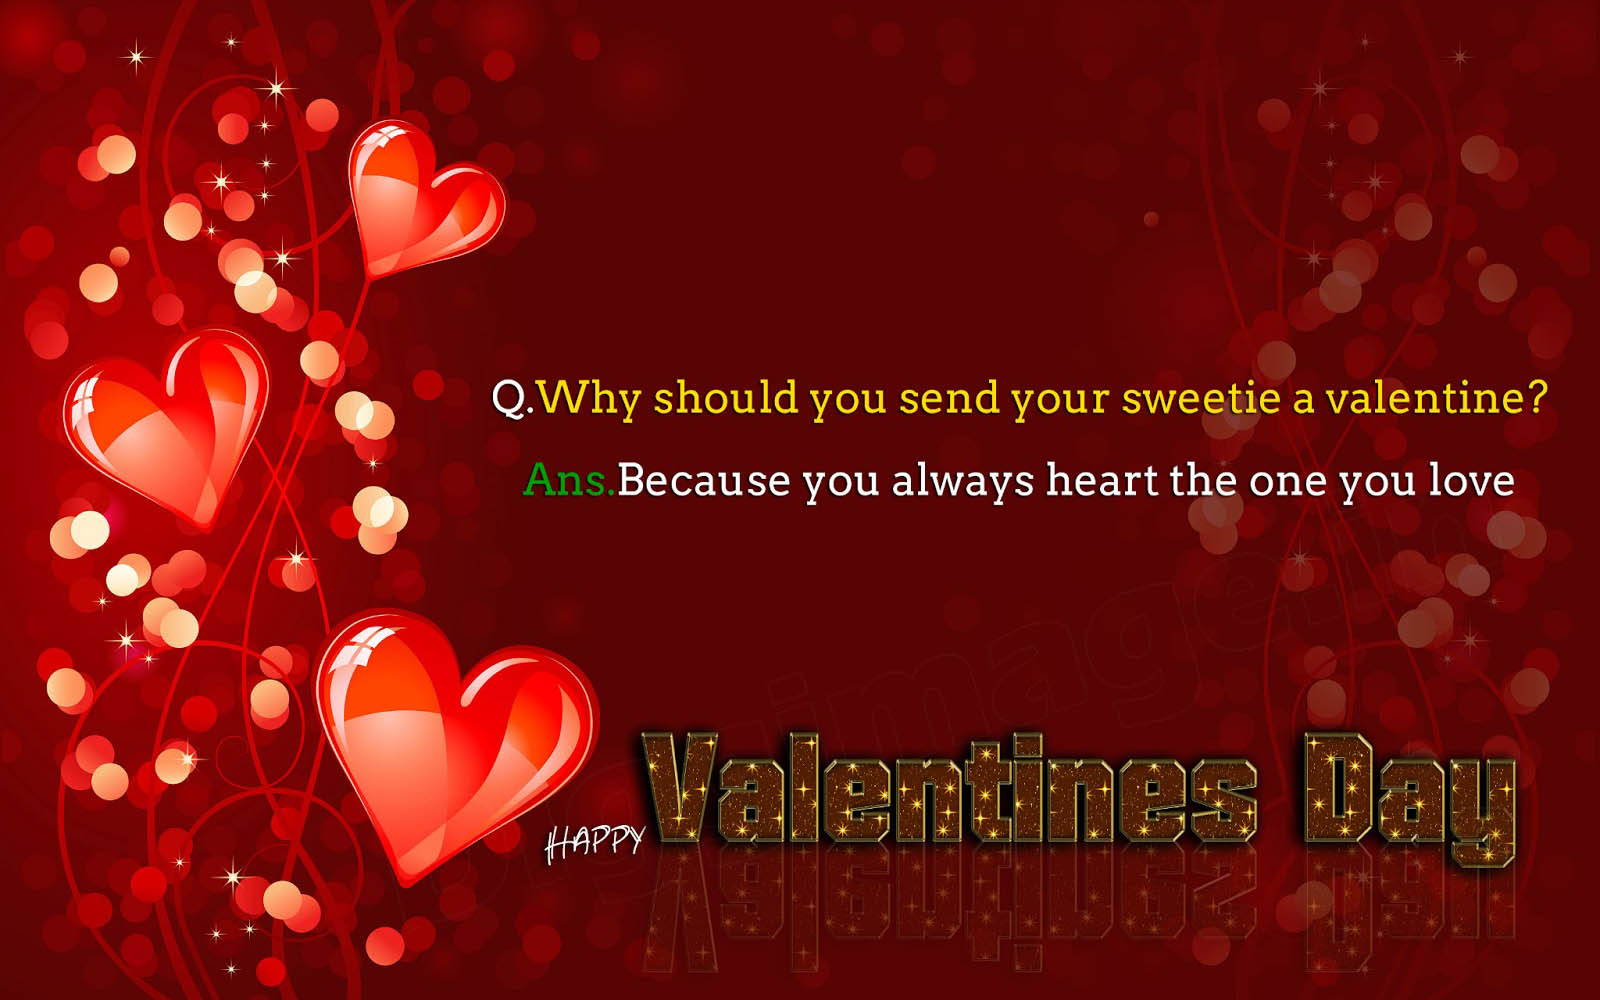 wallpapers: Valentines Day Greetings1600 x 1000